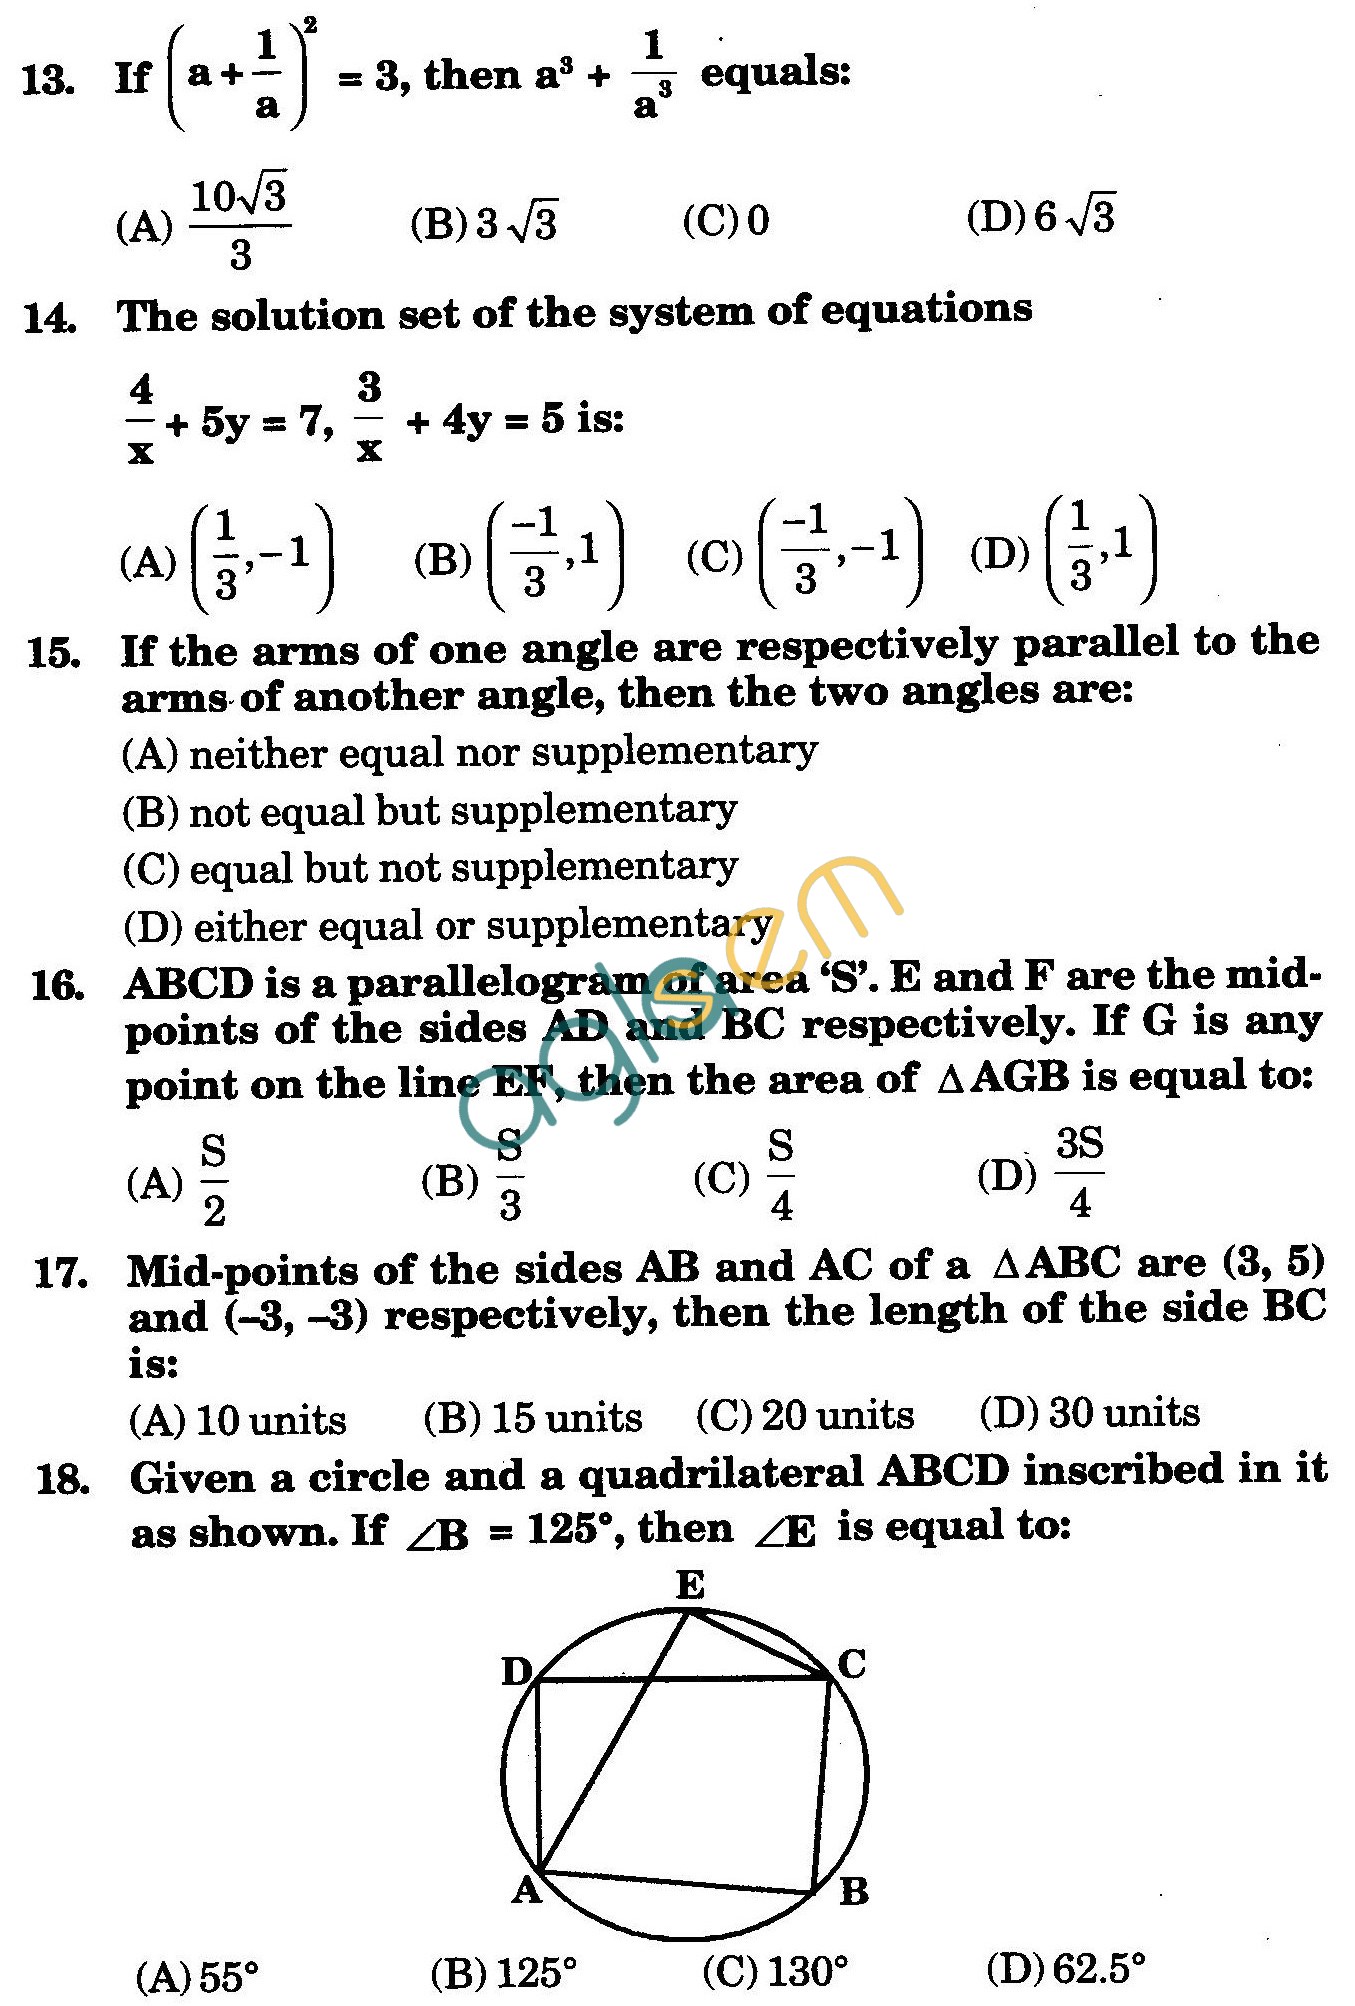 NSTSE 2010: Class IX Question Paper with Answers - Mathematics